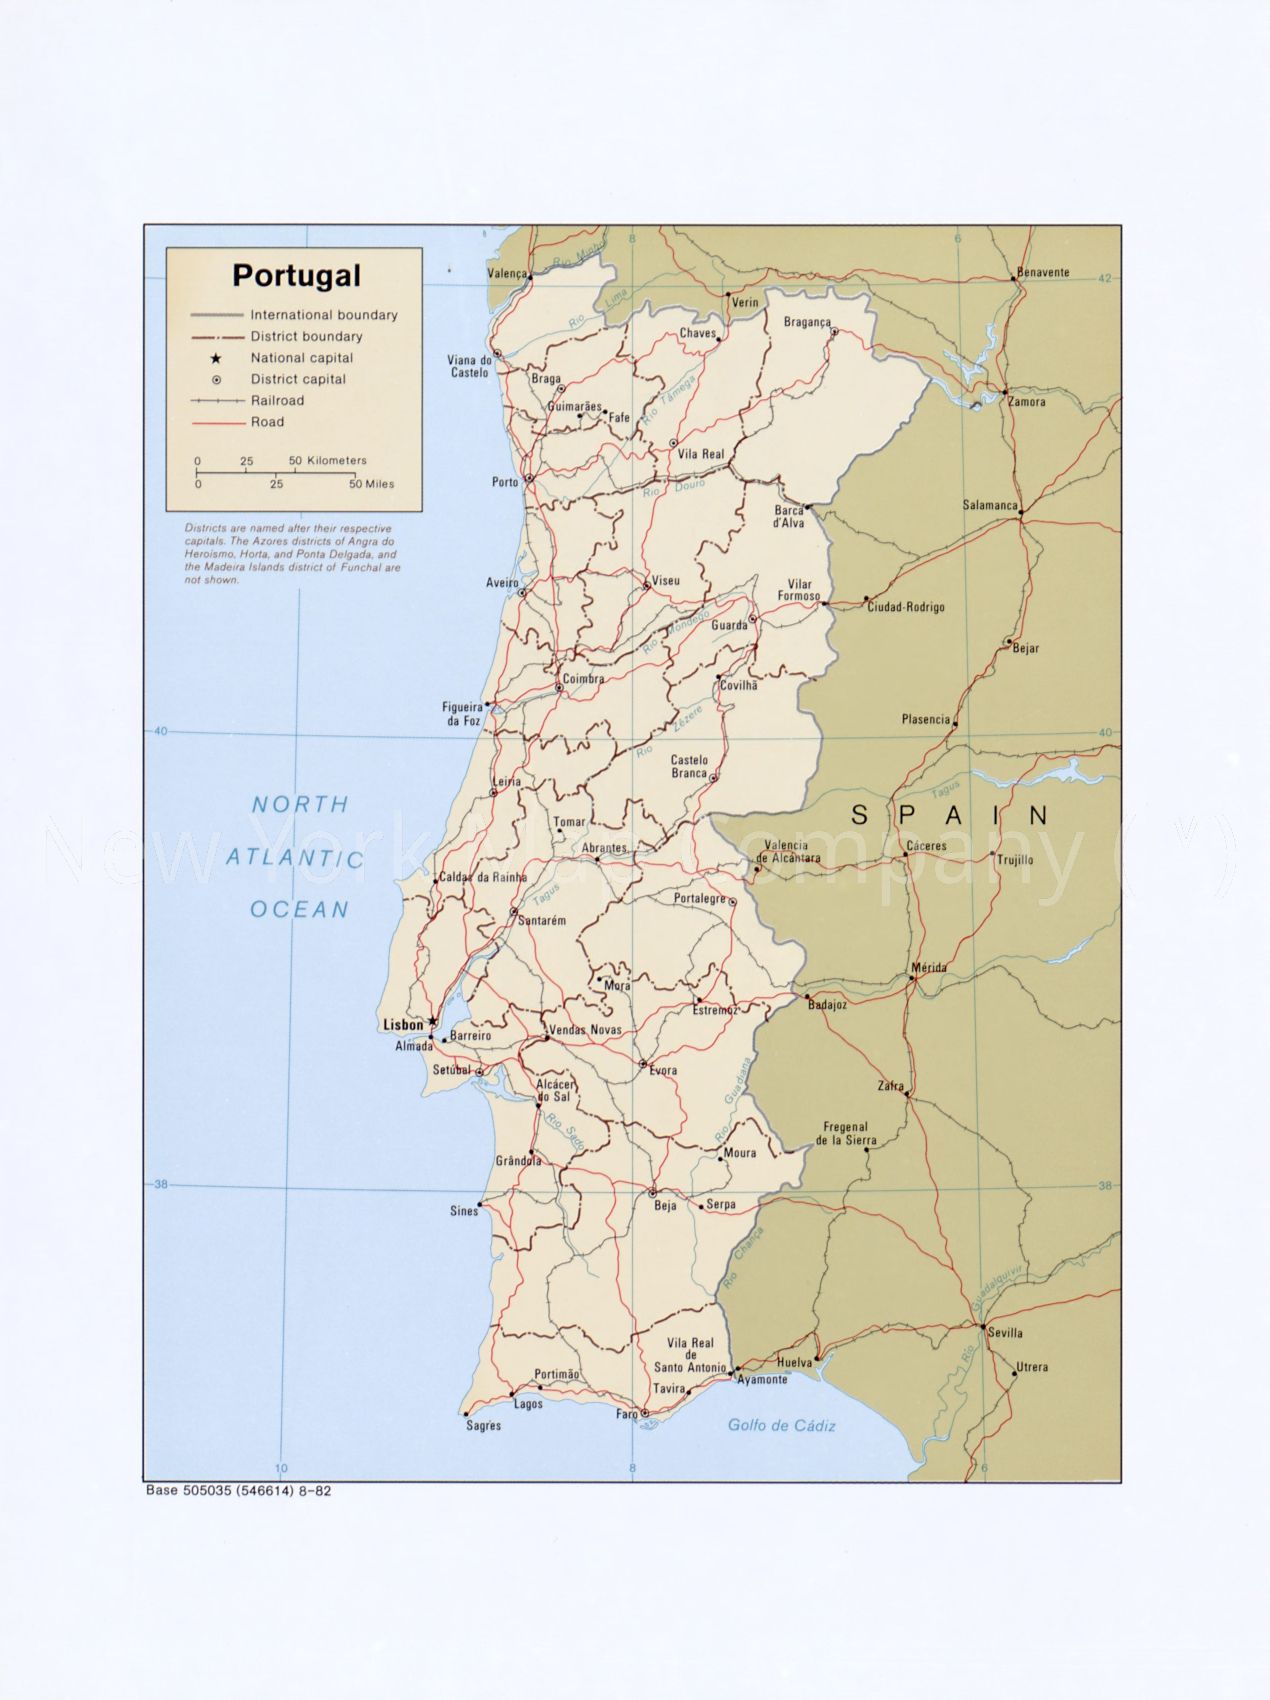 1982 map Portugal. Map Subjects: Portugal